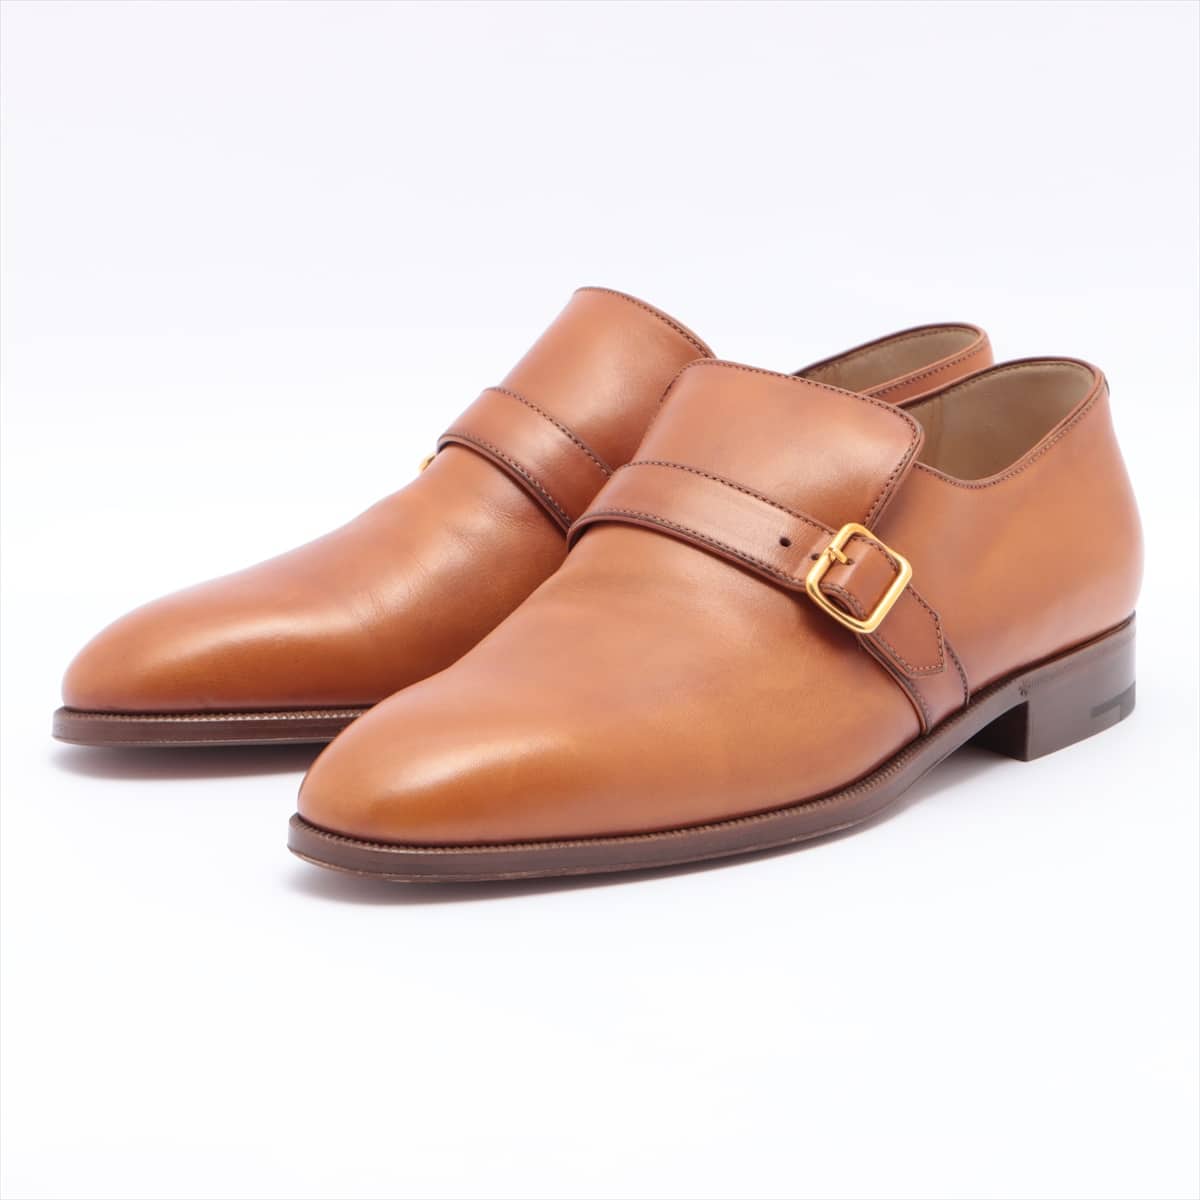 Berluti Leather Leather shoes 7 Men's Brown